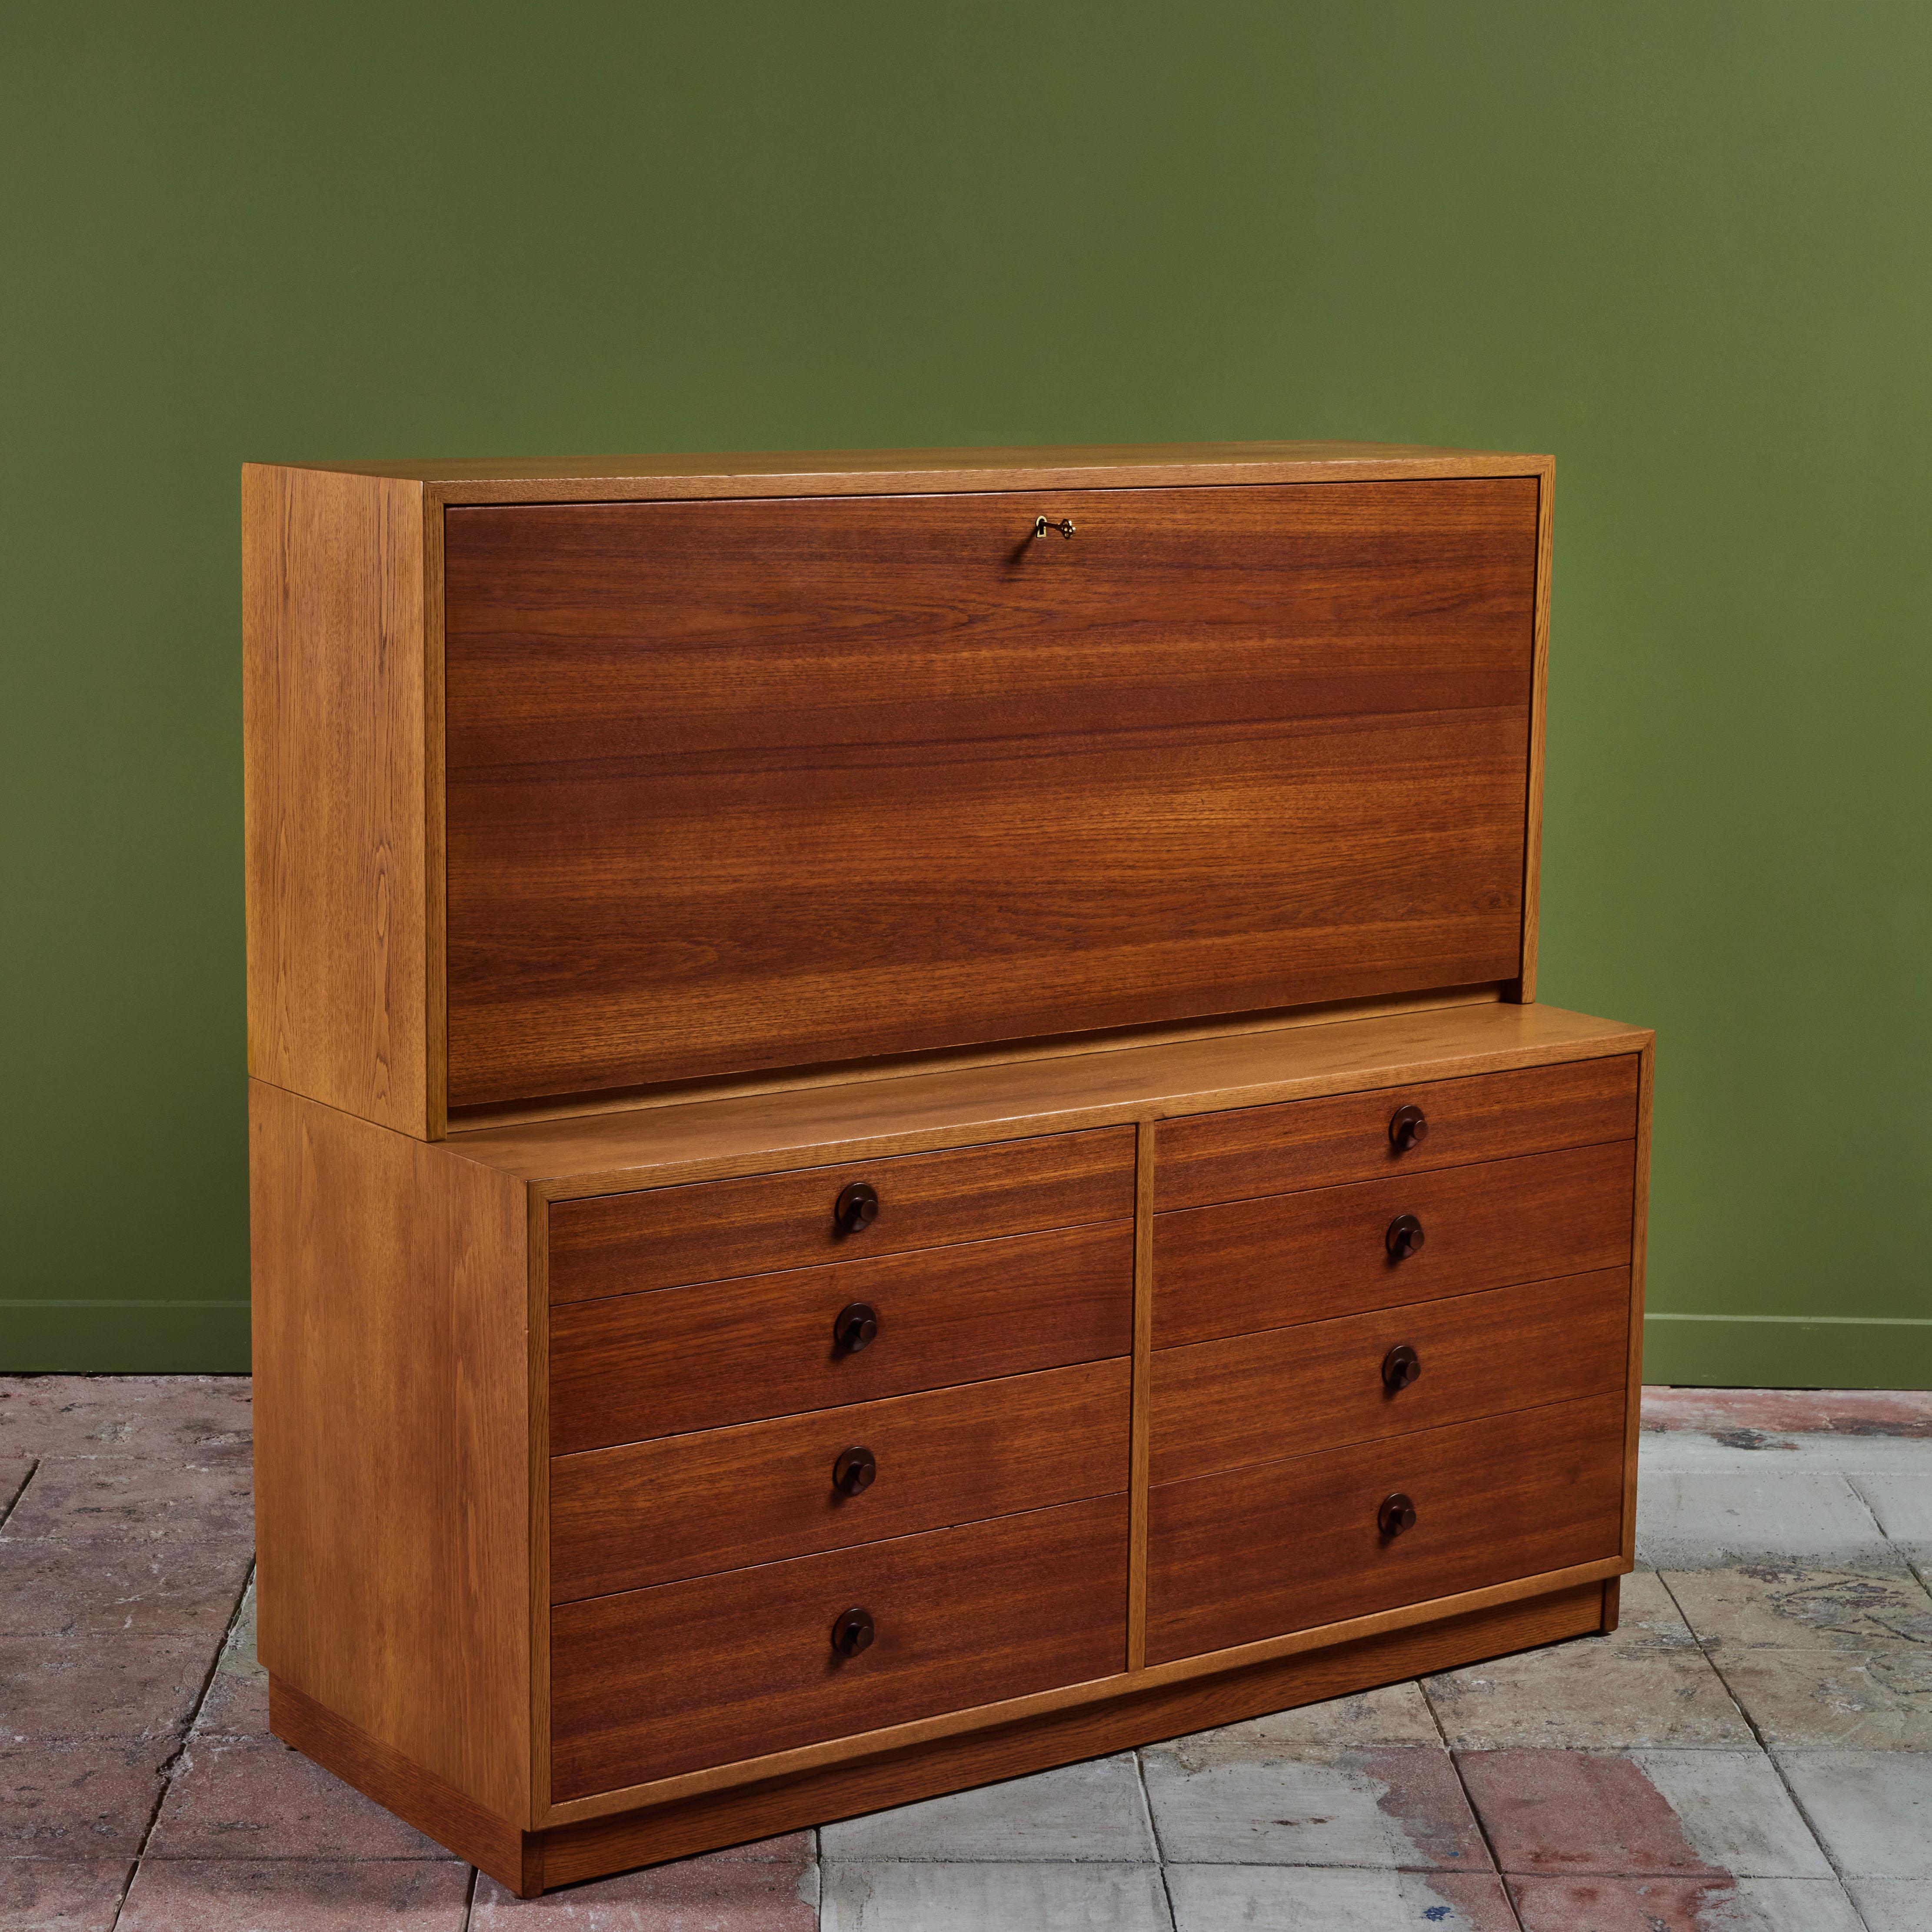 Oak and teak storage unit and desk by Børge Mogensen for Karl Andersson and Sons c.1960s, Sweden. This two piece storage cabinet has eight drawers along the lower cabinet and a drop front upper cabinet with key. The interior of the top portion has